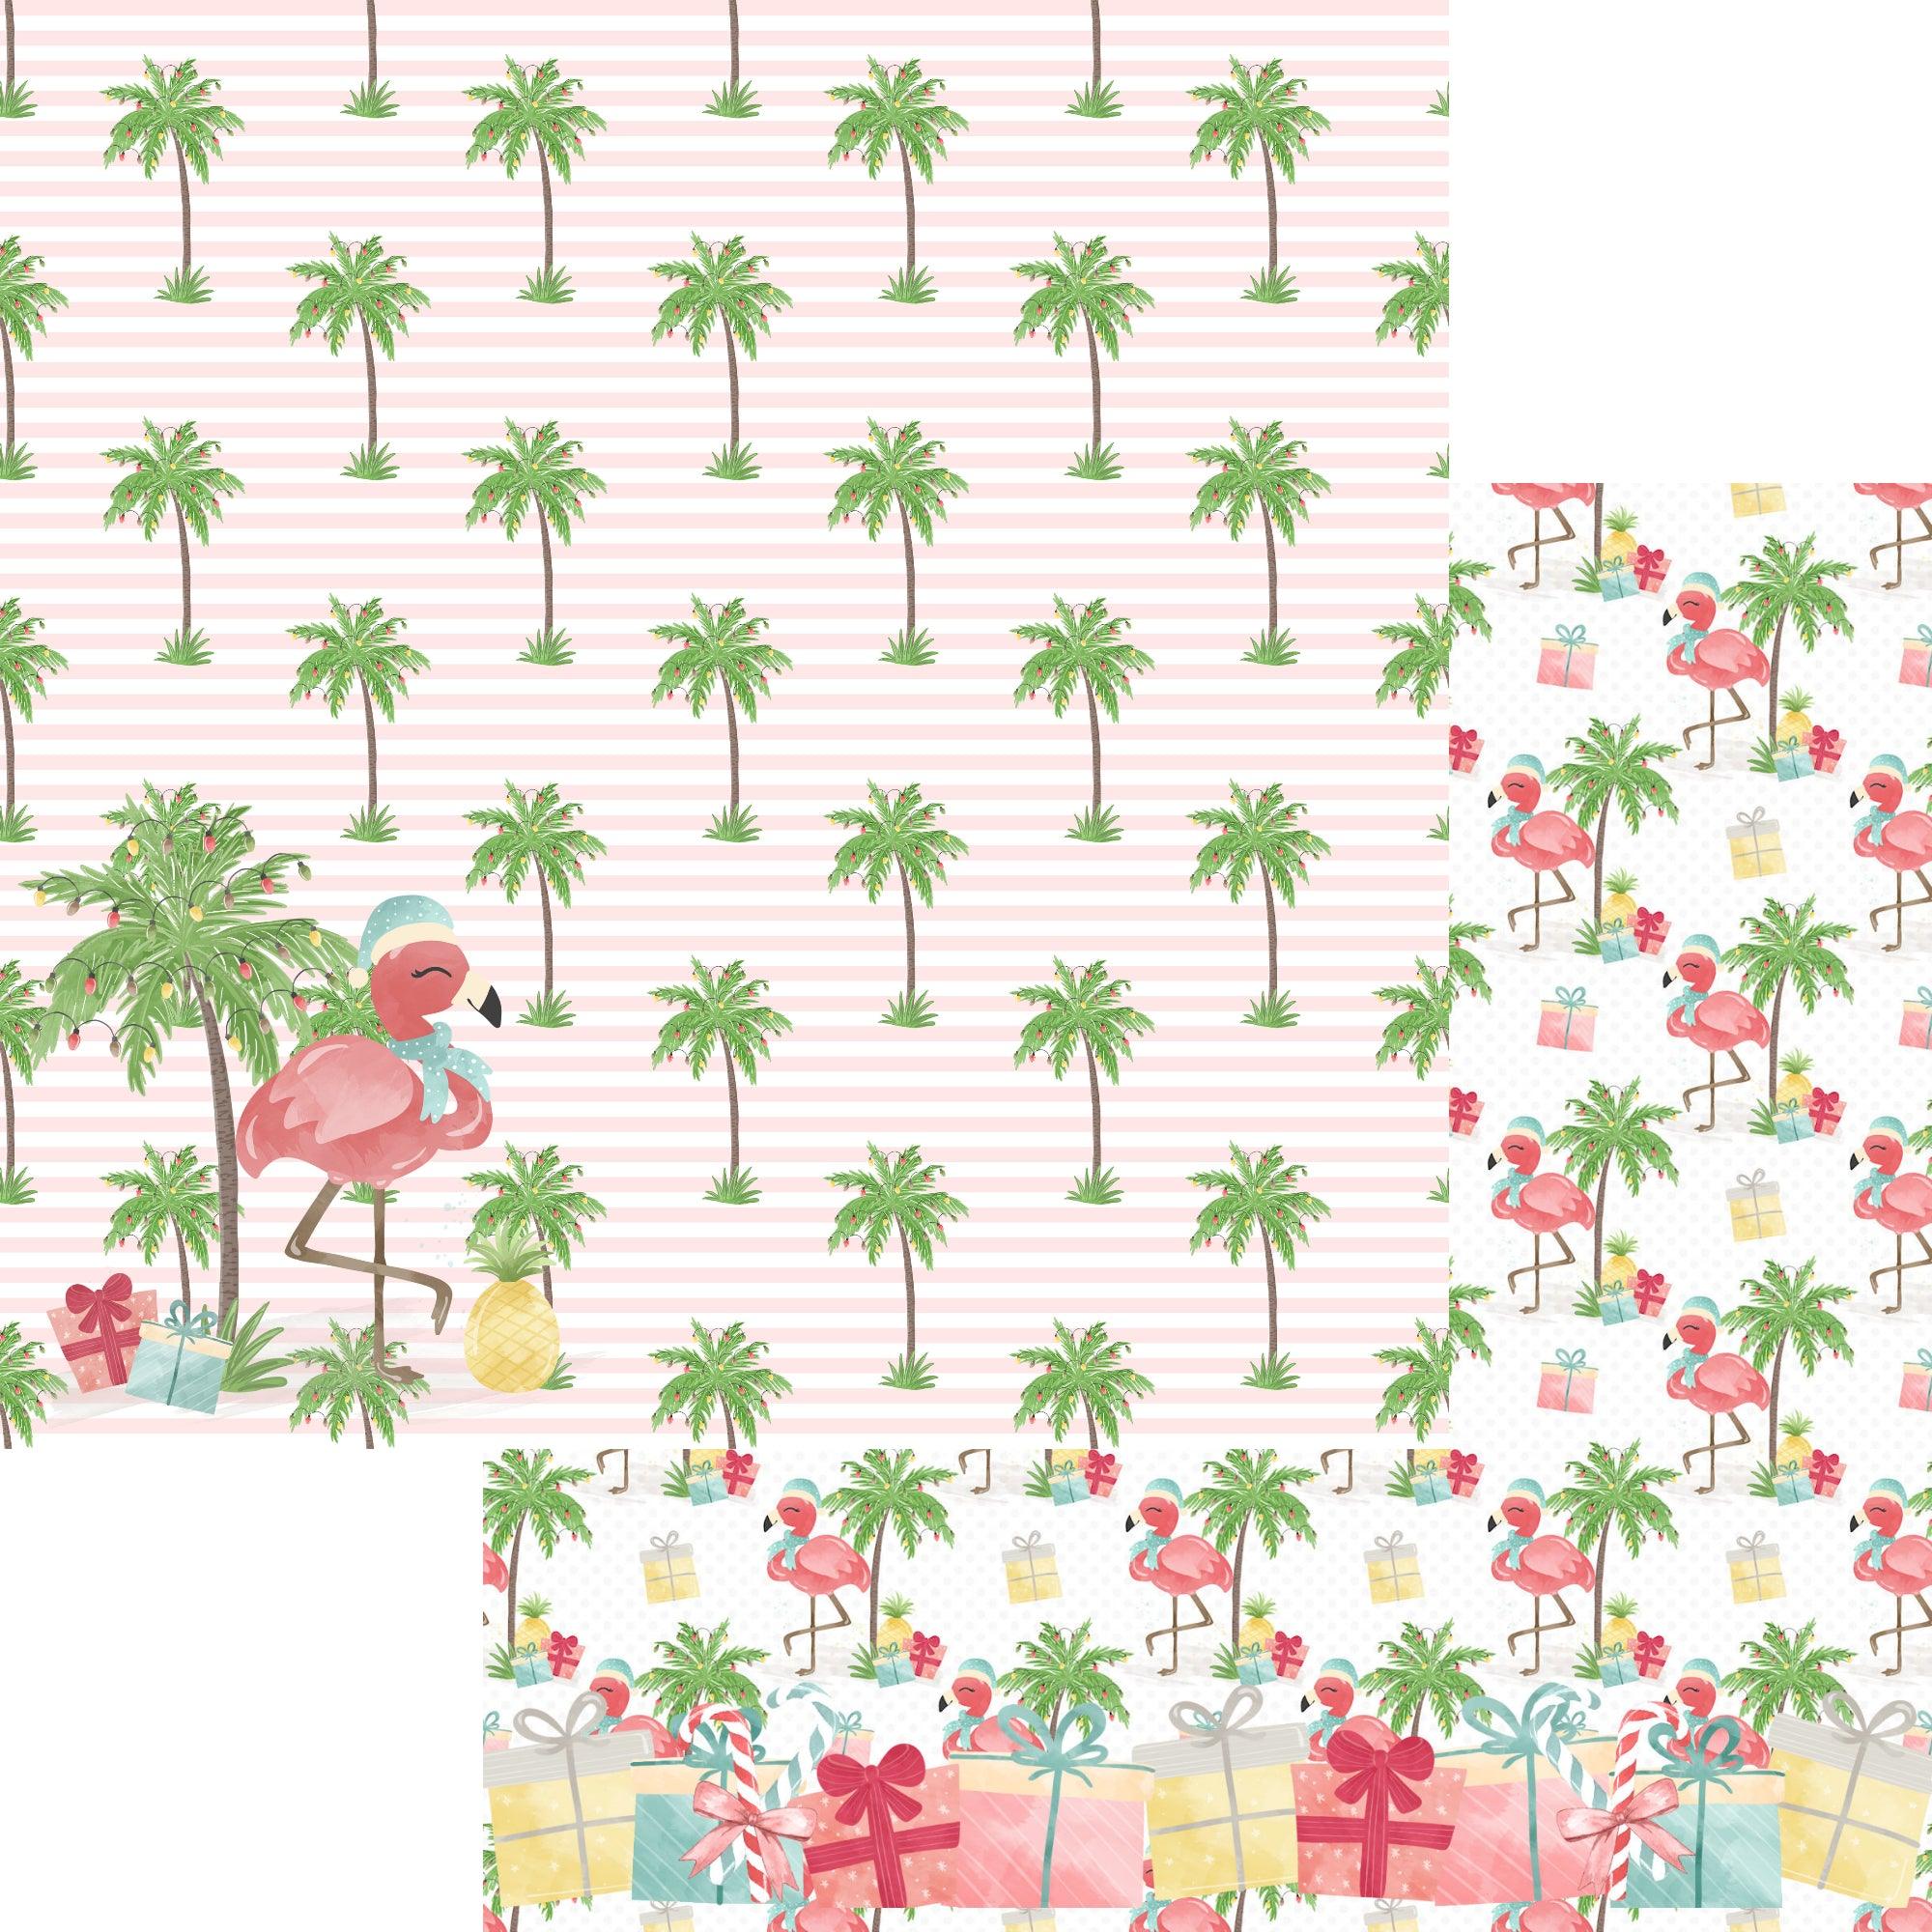 Flamingo Christmas Collection 12 x 12 Scrapbook Paper & Embellishment Kit by SSC Designs - Scrapbook Supply Companies